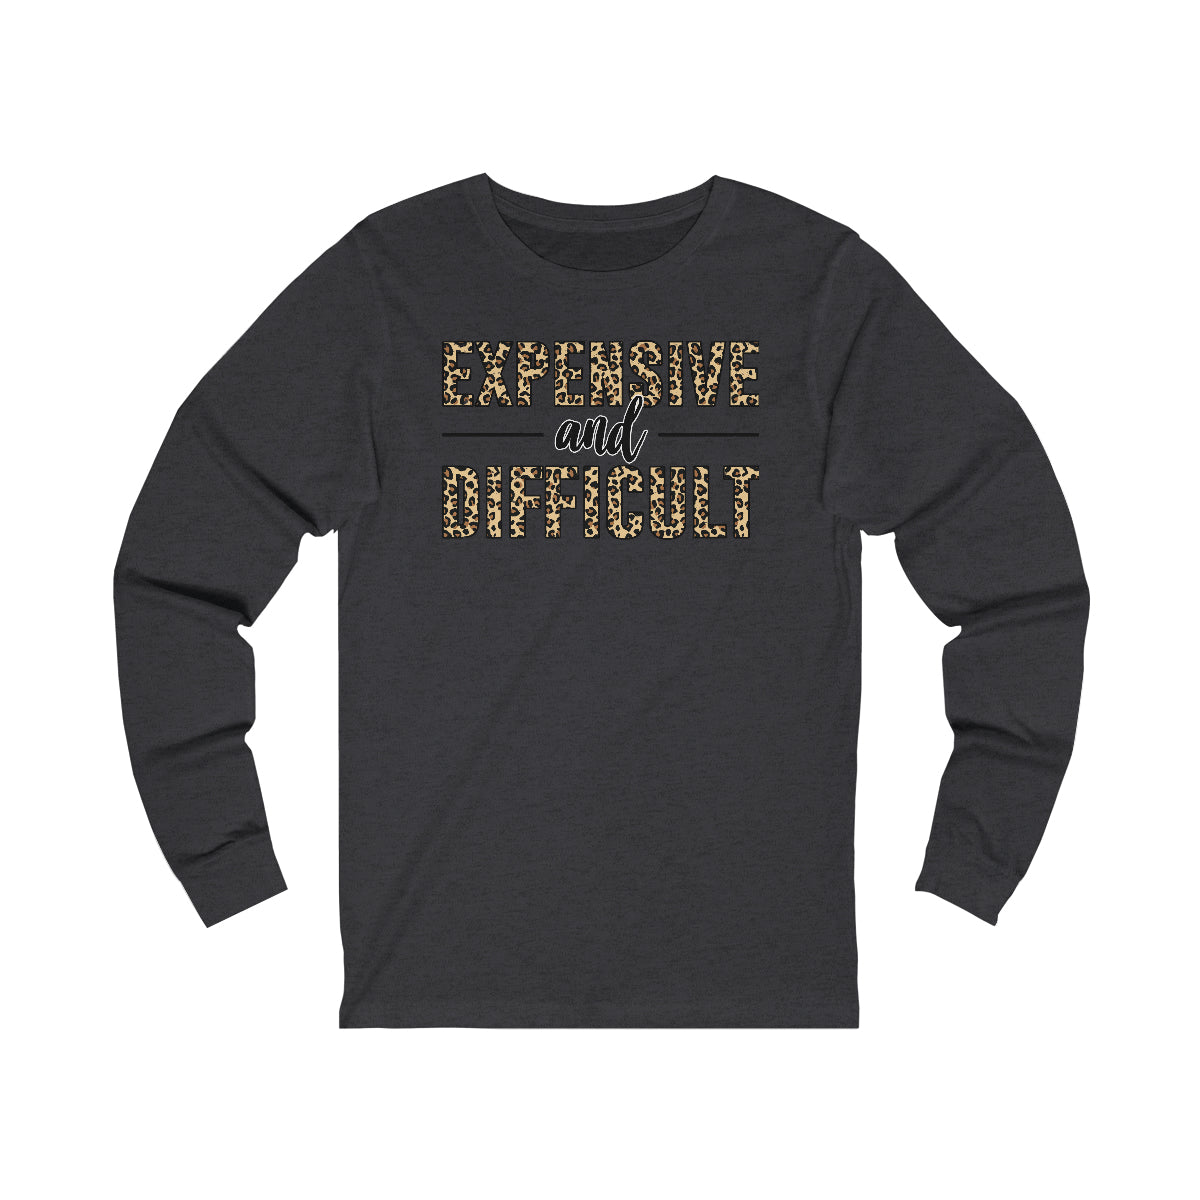 Expensive and Difficult Unisex Jersey Long Sleeve Tee - BELLA